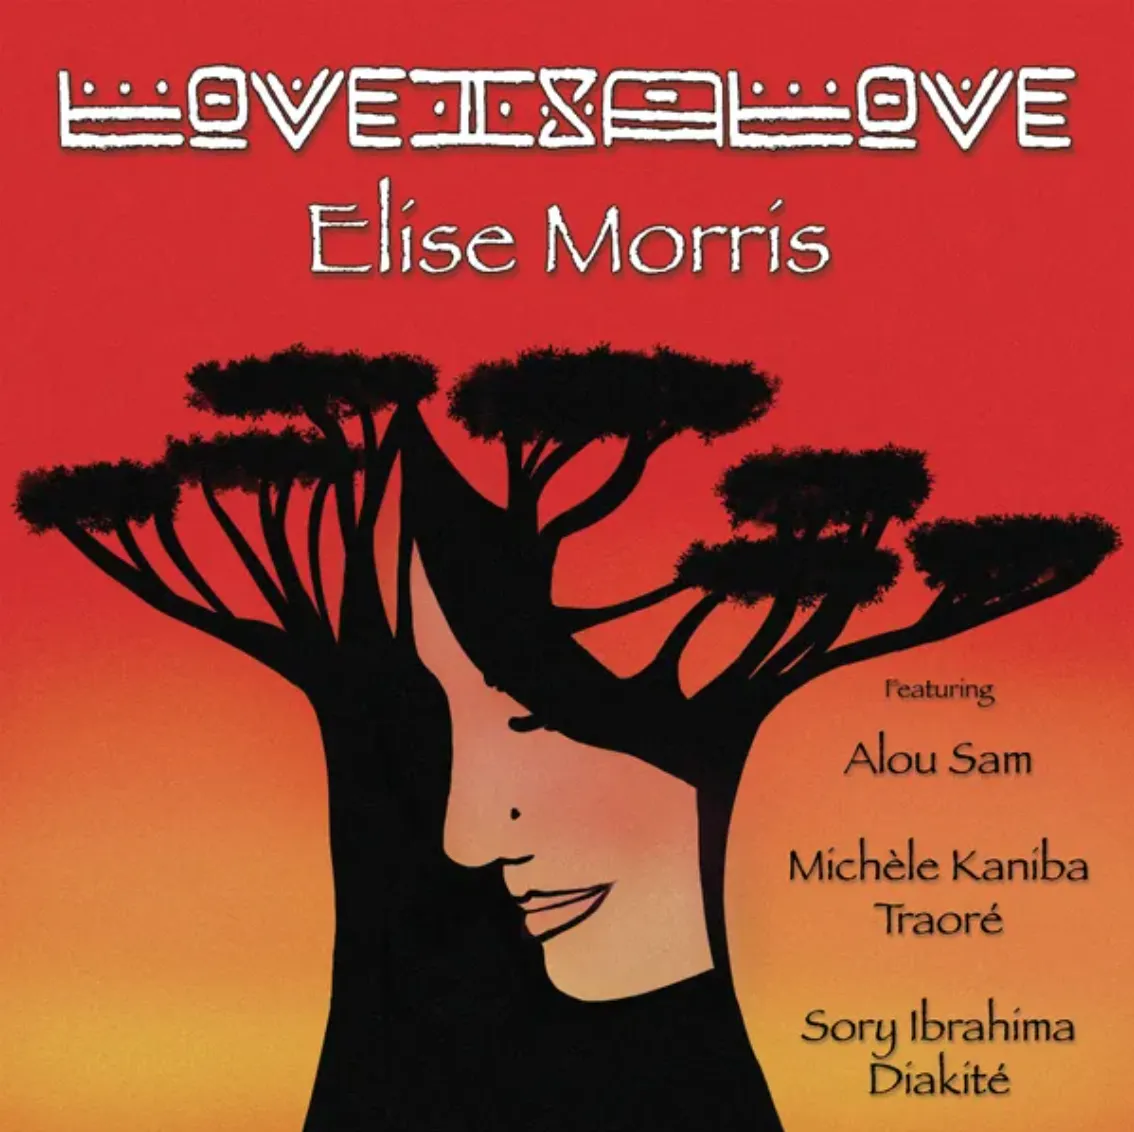 Album cover for 'LoveIsALove' by Elise Morris, the eclectic jazz musician and singer-songwriter, highlighting her international collaboration with artists from Serbia and Mali, blending diverse musical influences.